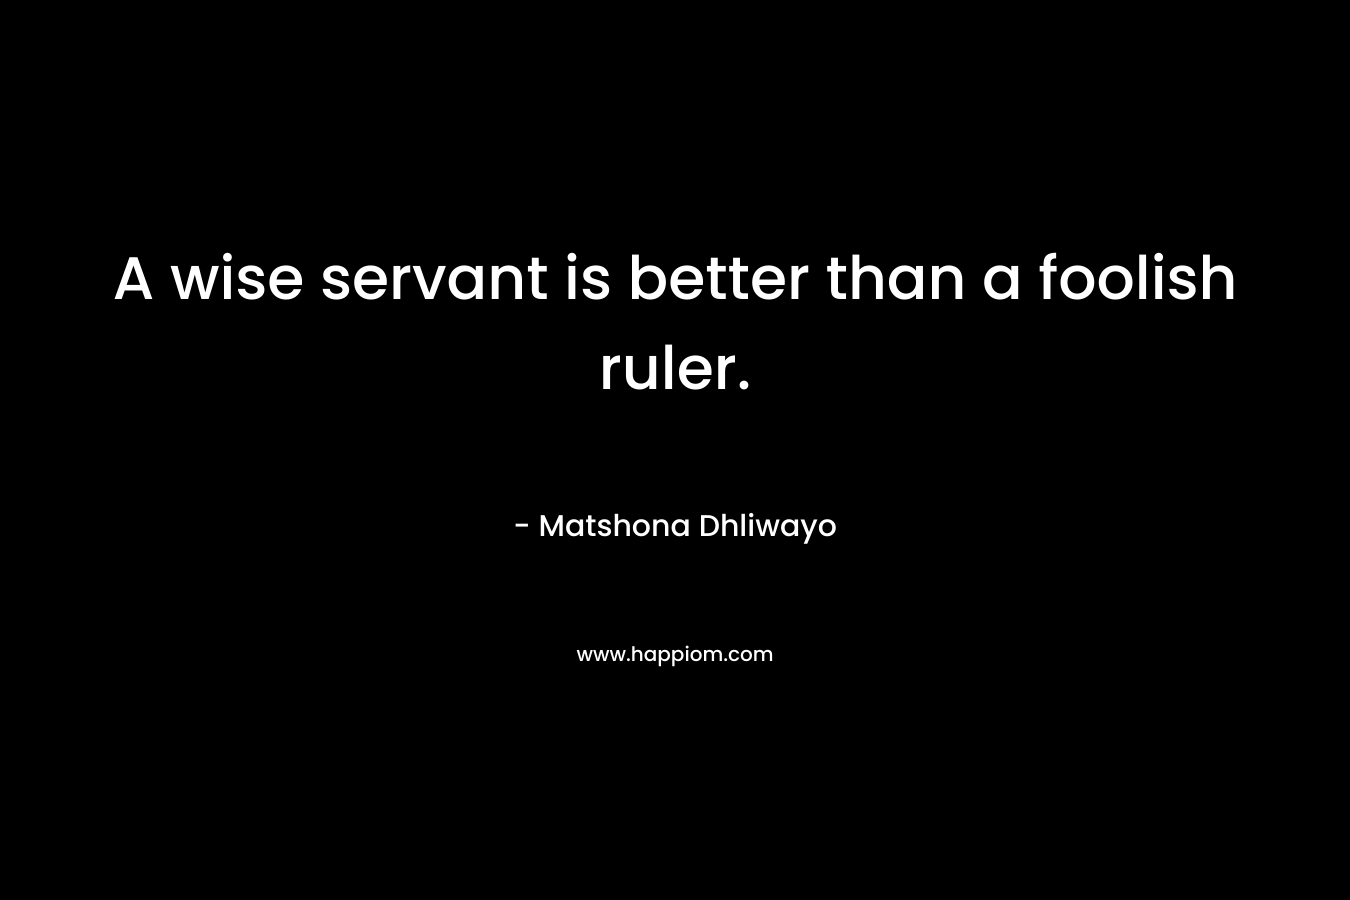 A wise servant is better than a foolish ruler.